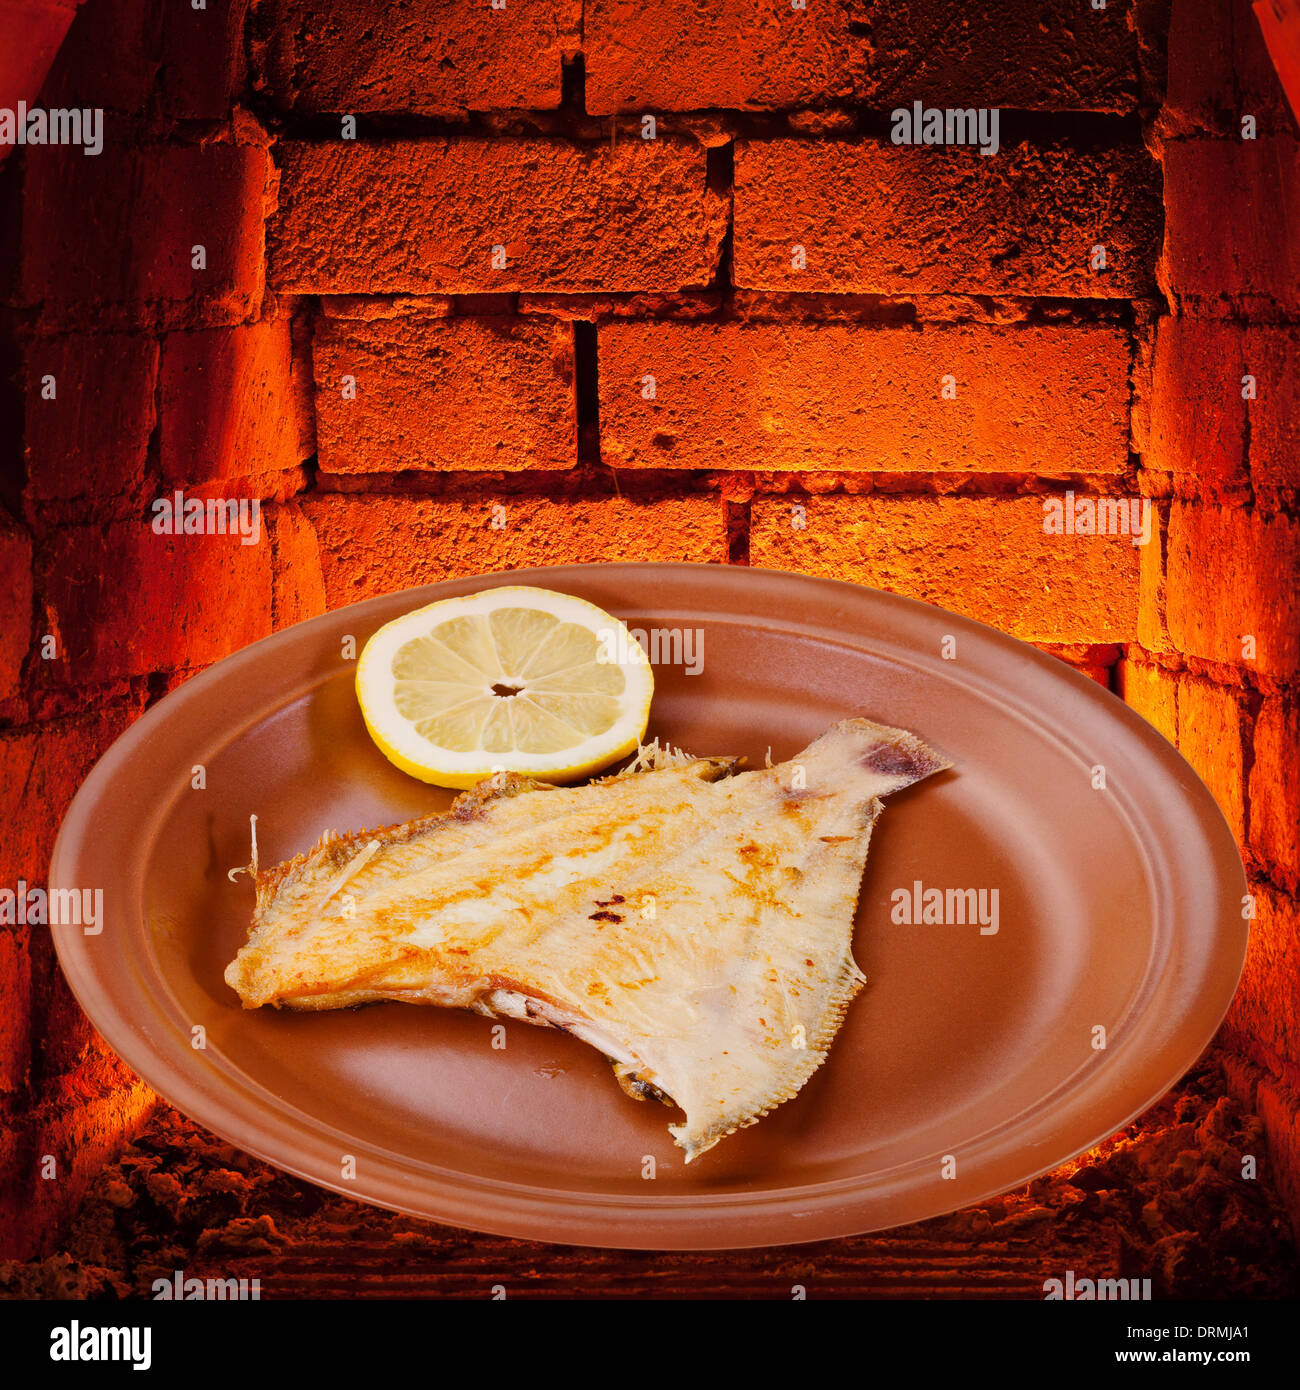 fried sole fish on plate and hot bricks of wood burning oven Stock Photo